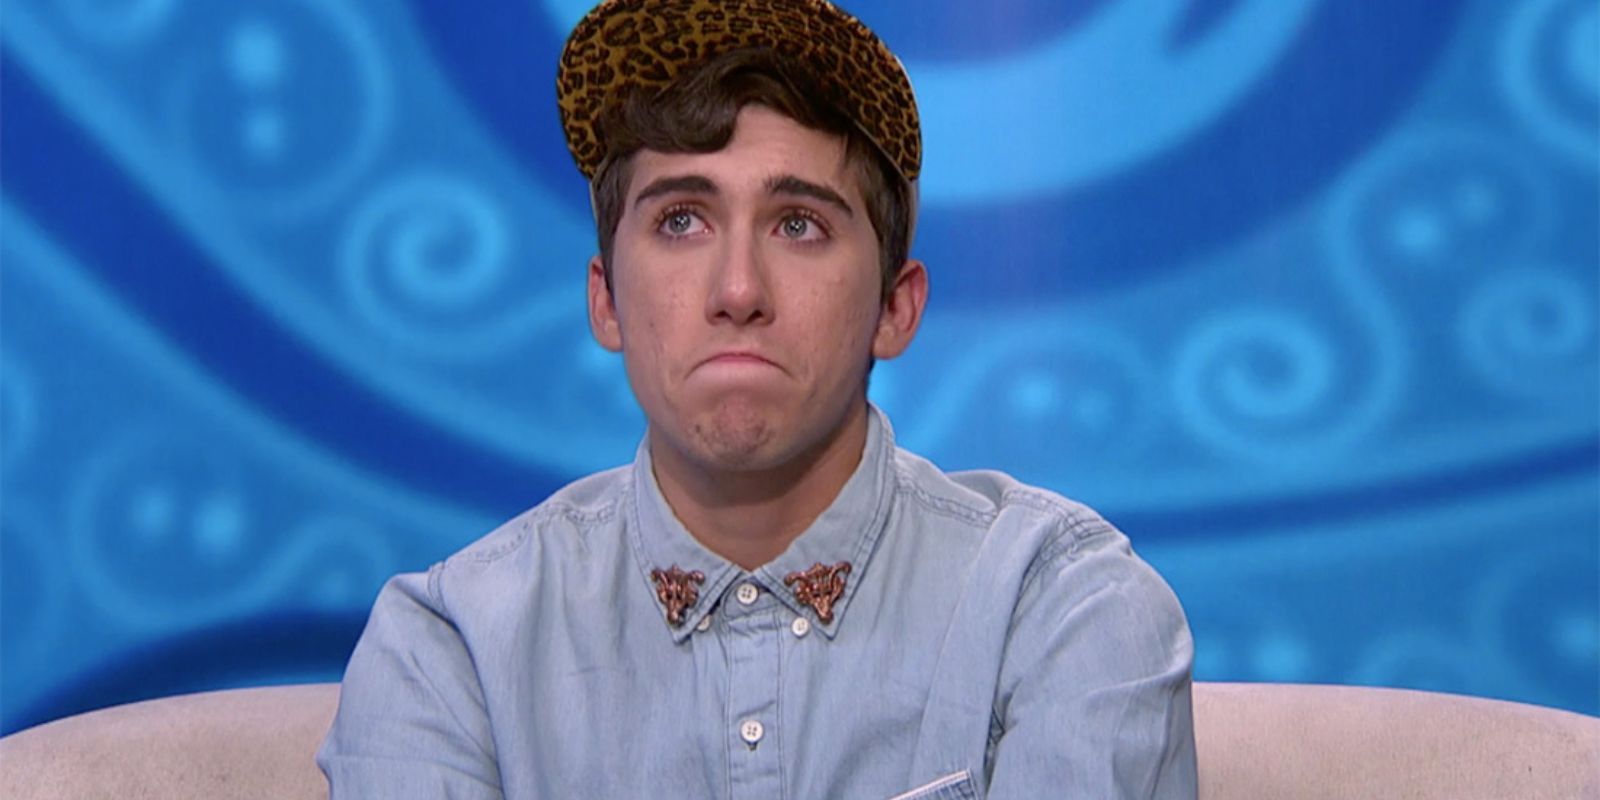 Jason frowning in the diary room